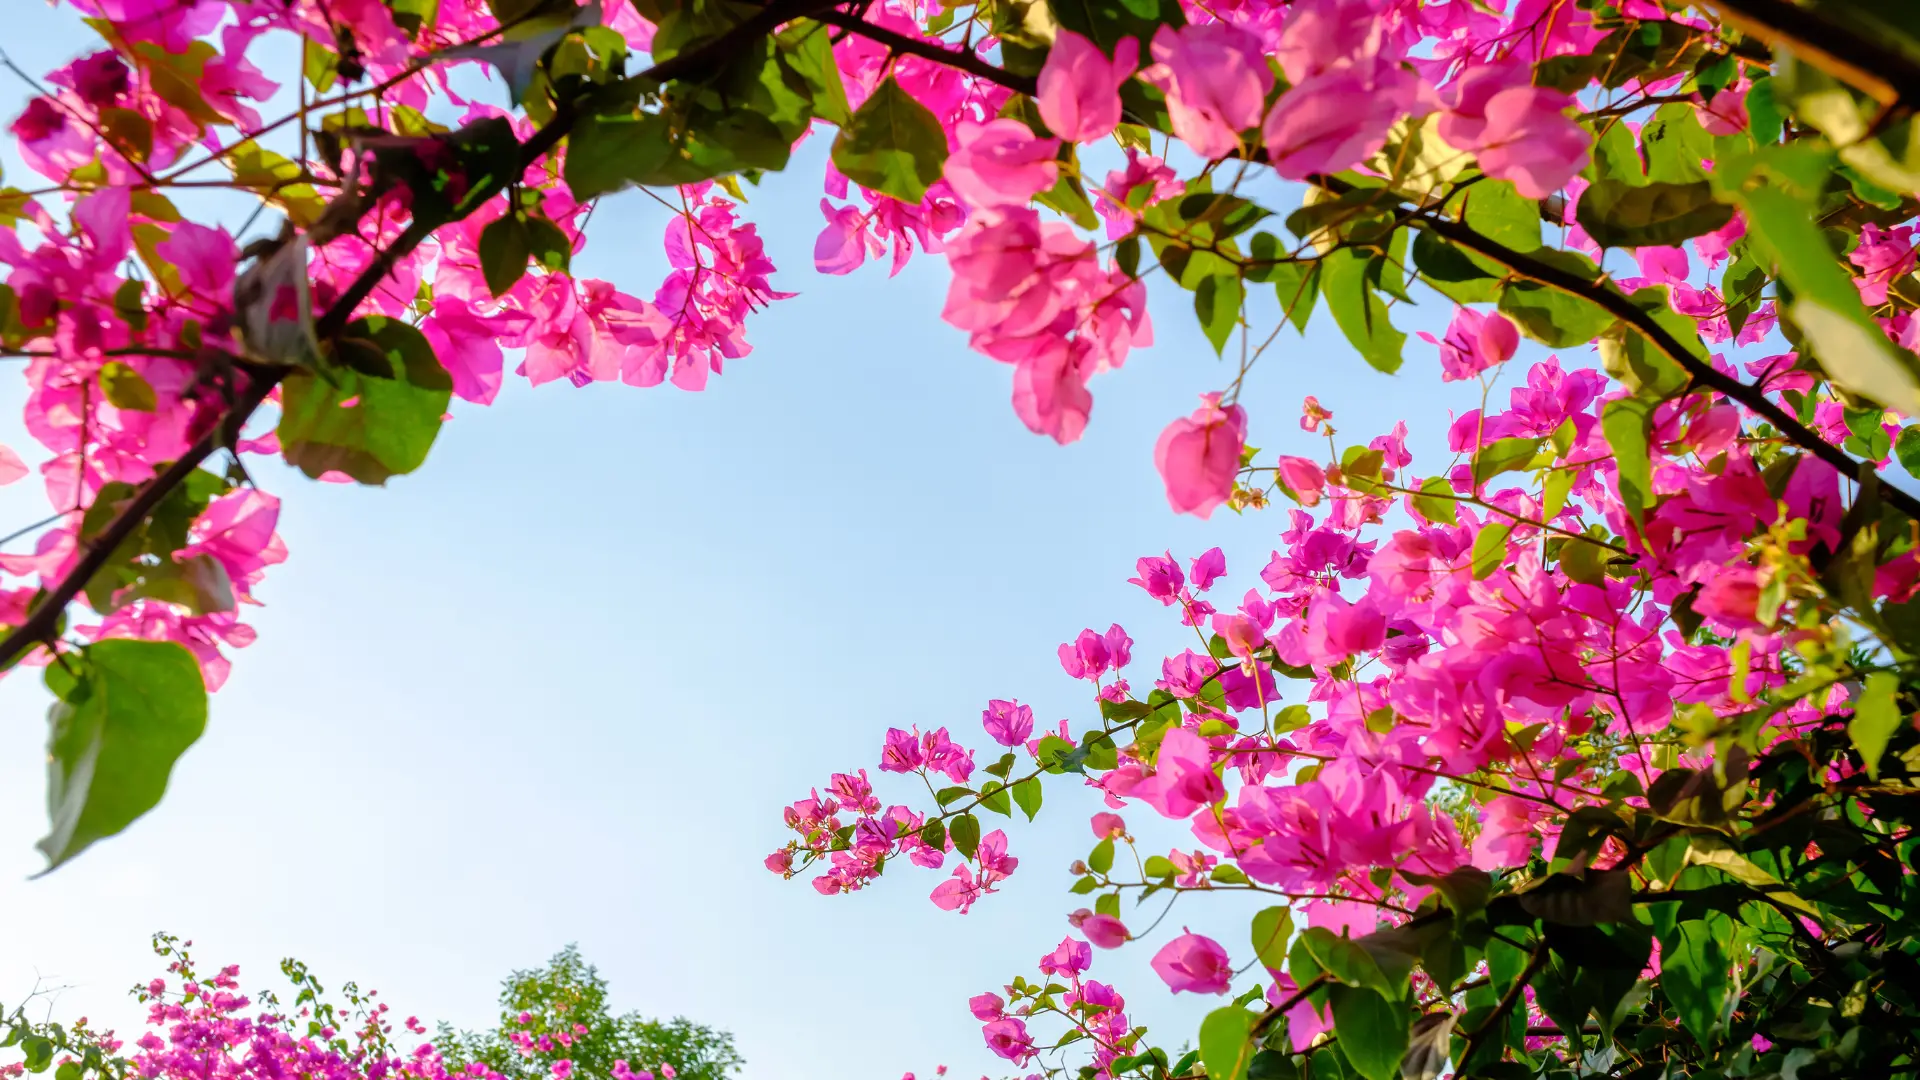 Can You Use Ericaceous Compost For Bougainvillea